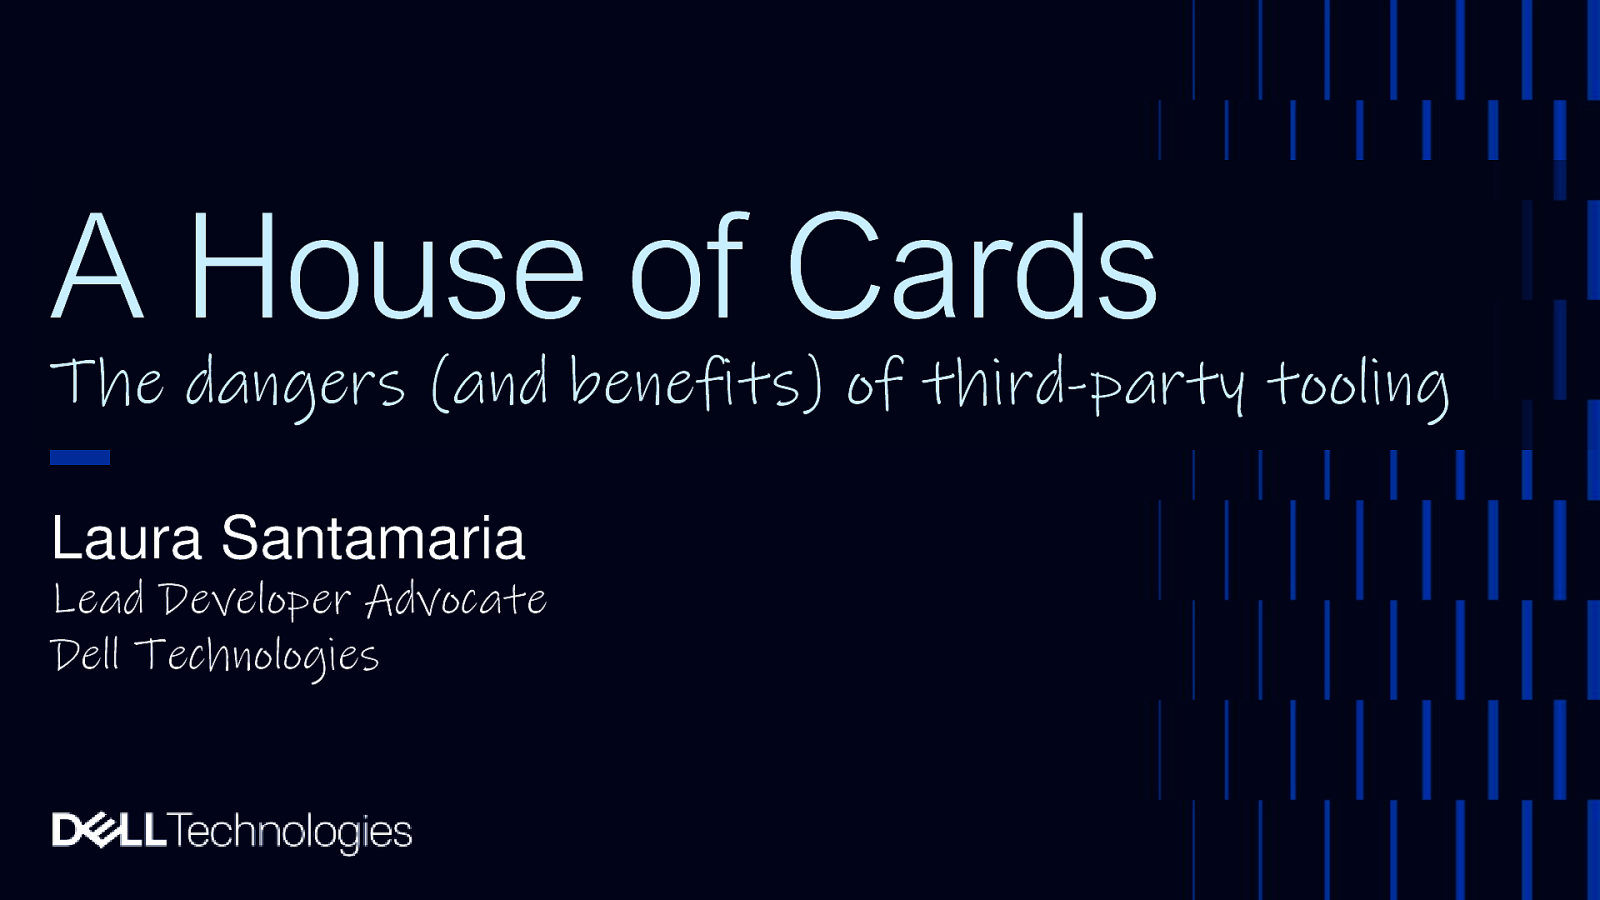 A House of Cards: The dangers (and benefits) of third-party tooling